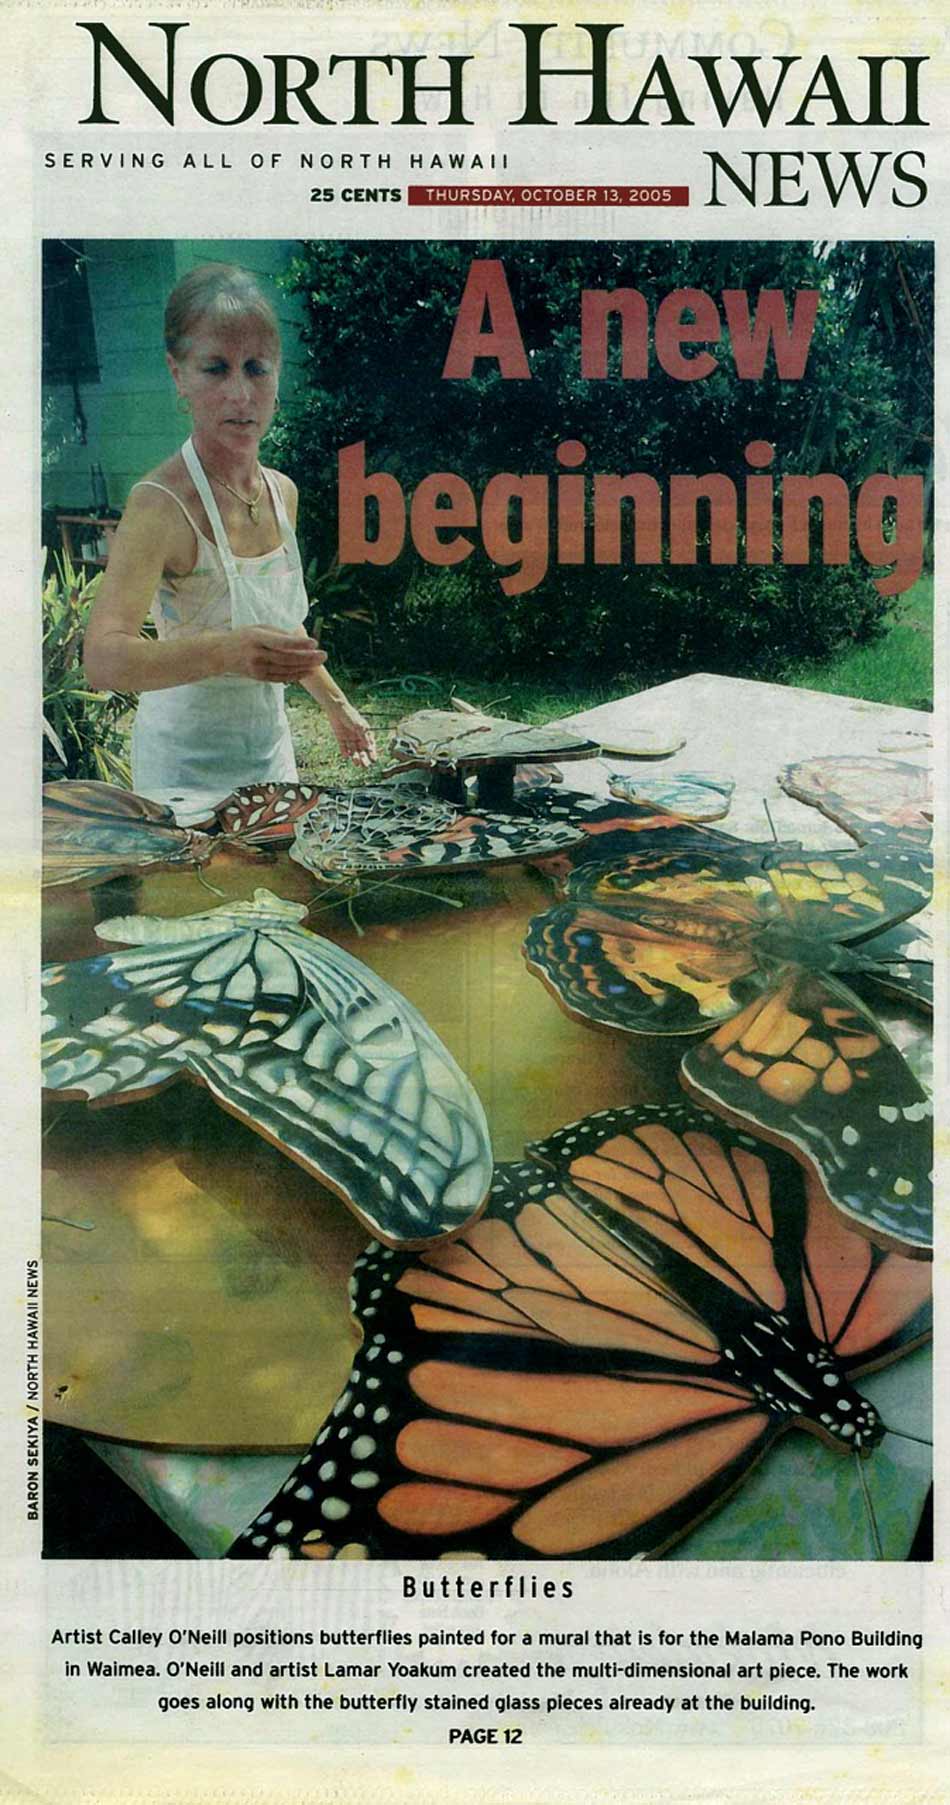 Artist Calley O'Neill positions butterflies painted for a mural that is for the Malama Pono Building in Waimea.  O'Neill and artist Lamar Yoakum created the multi-dimensional art piece.  The work goes along with the butterfly stained glass pieces already at the building.